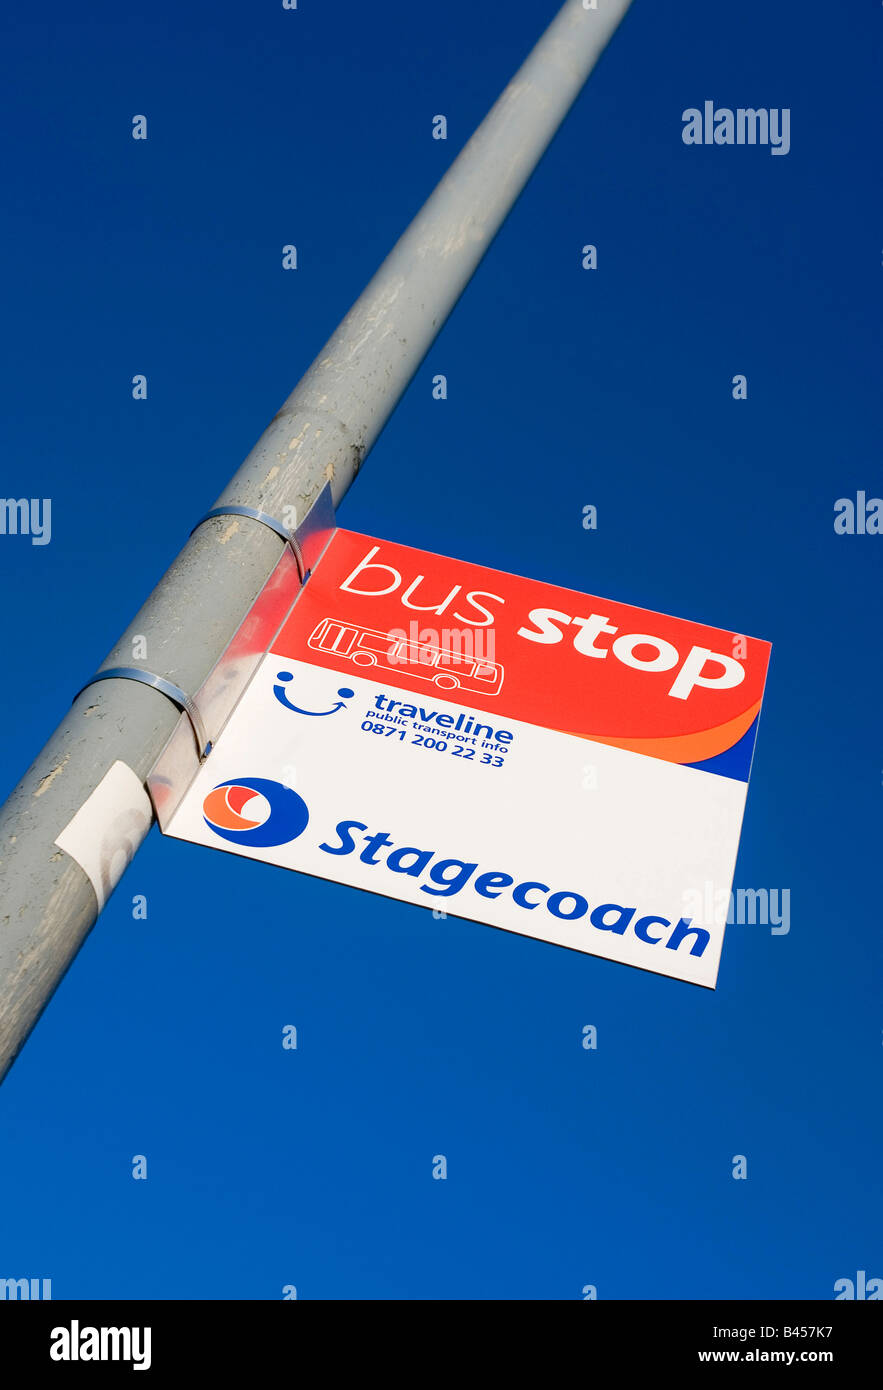 Stagecoach bus stop Stock Photo